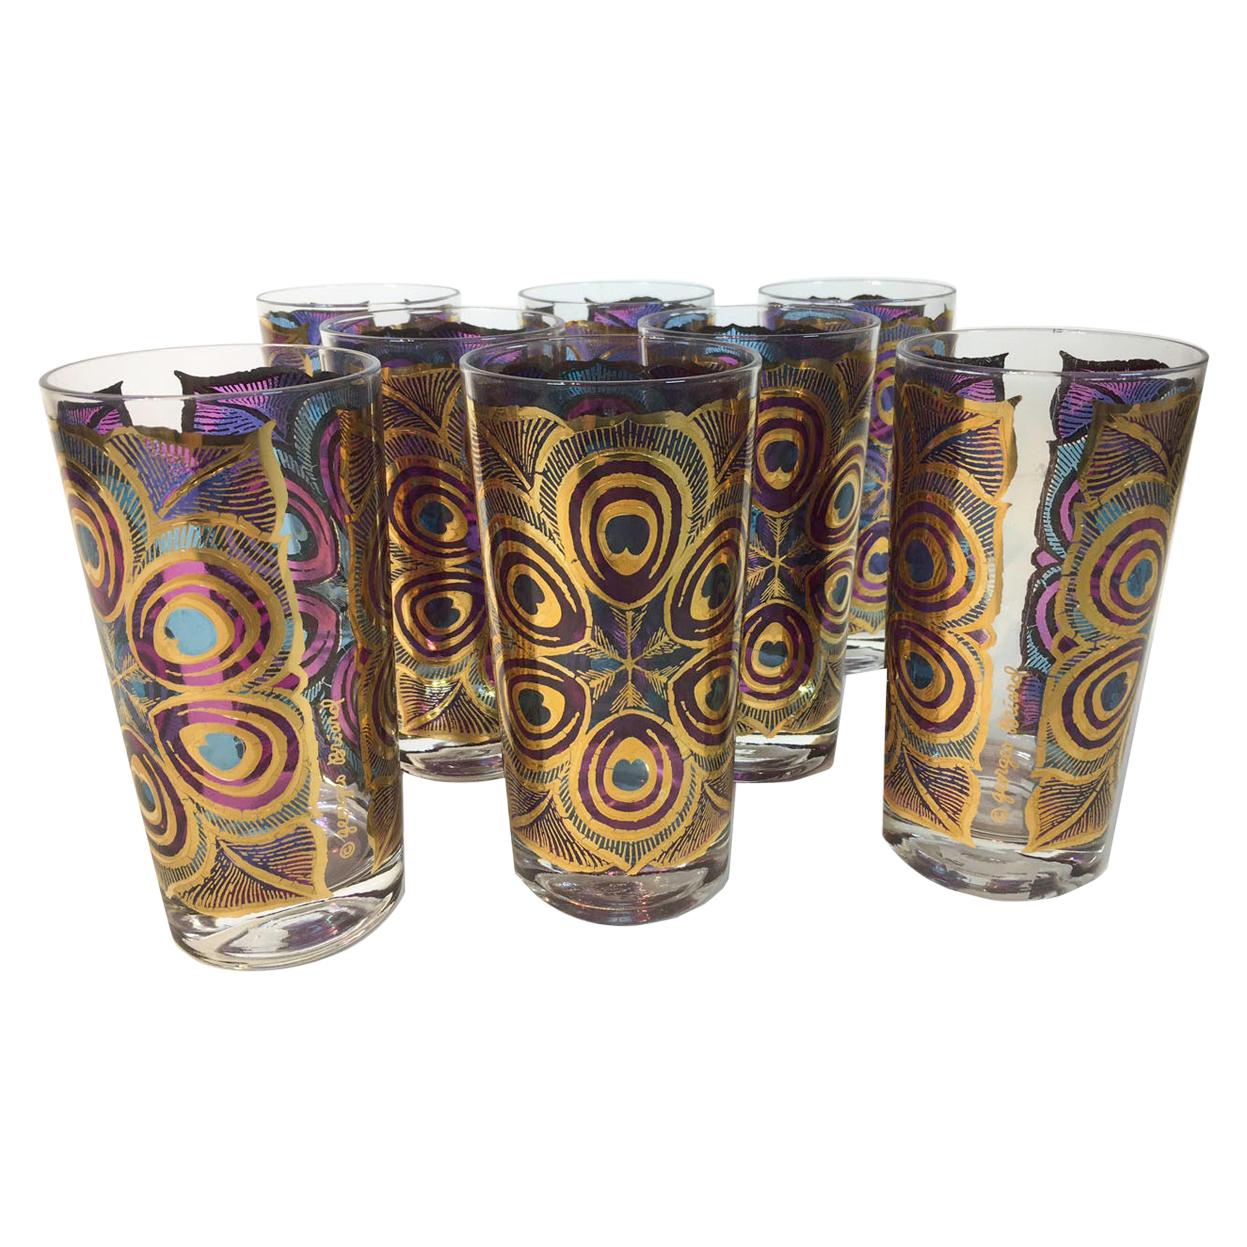 Signed Georges Briard Vintage Highball Glasses in the "Peacock" Pattern